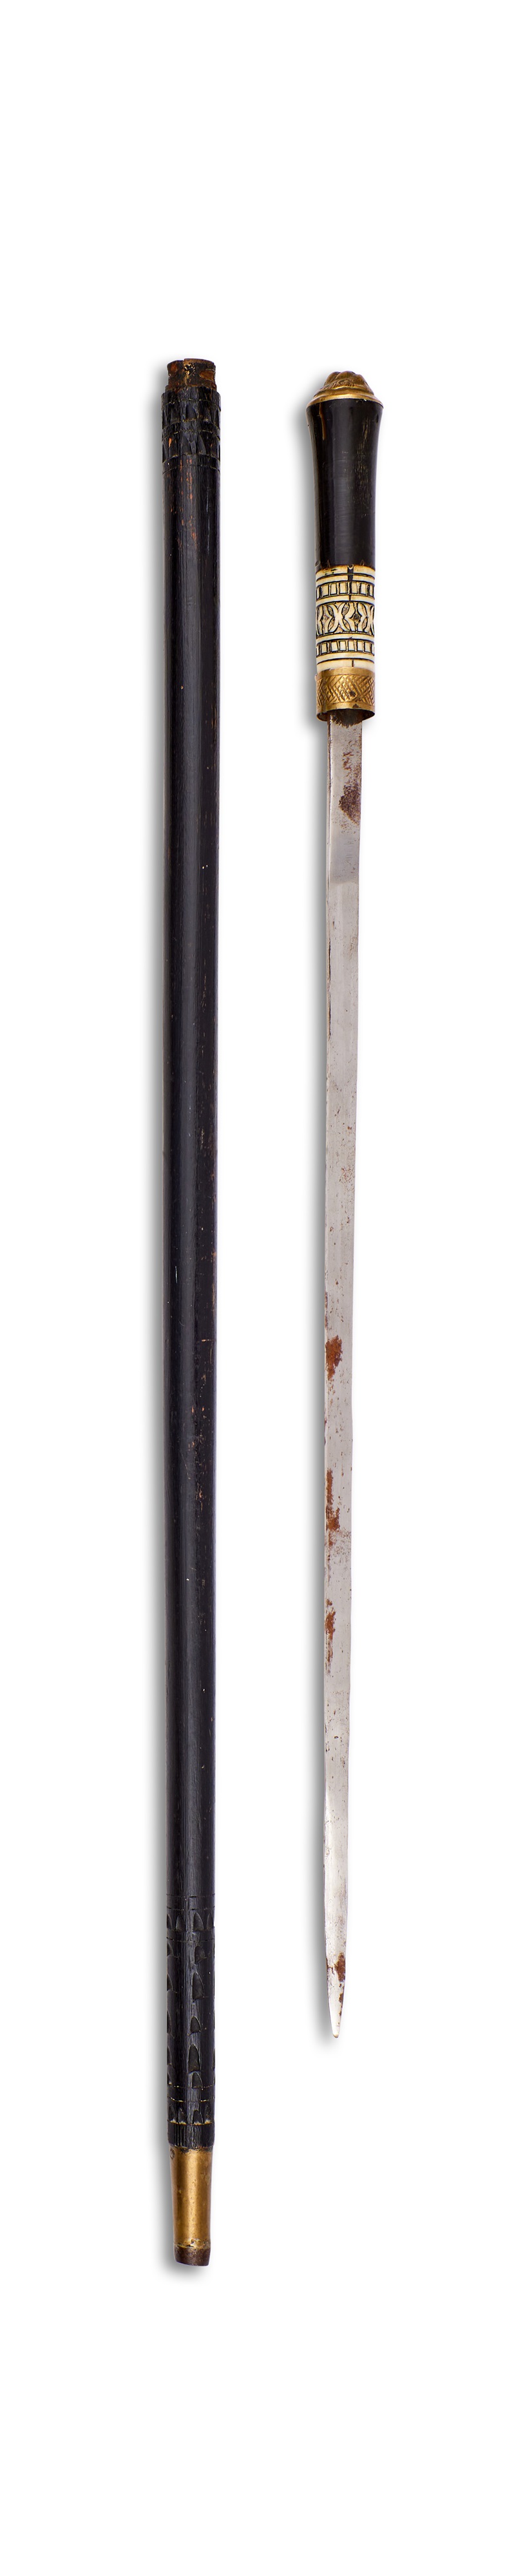 A LATE 19TH / EARLY 20TH CENTURY ANGLO INDIAN SWORD STICK